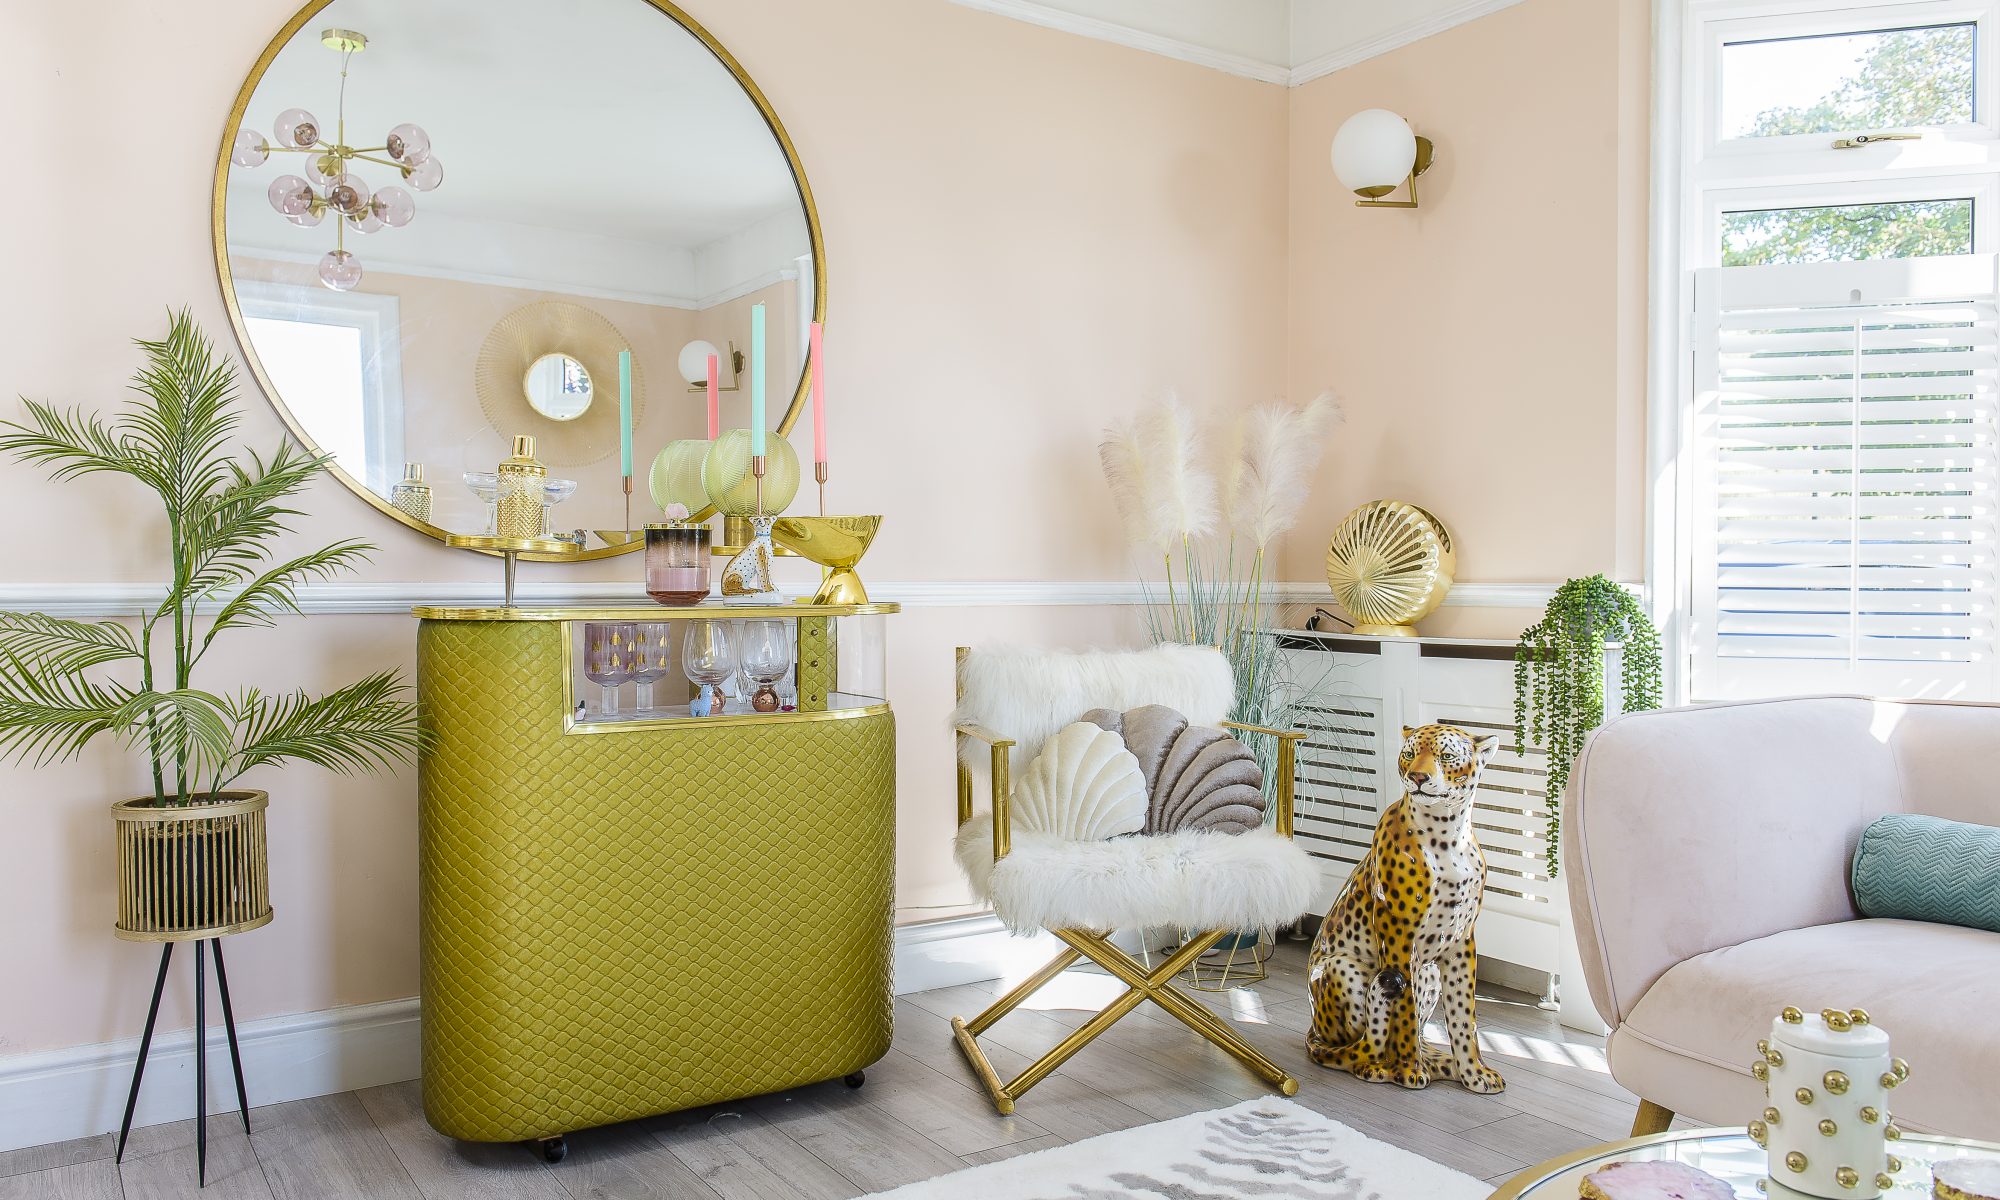 The sitting room is home to a quilted gold cocktail bar – a vintage find from Margate, sourced via Instagram. With a core palette of blush pinks and gold, Cat brought many of the room’s decor back from her shopping trips to HomeSense